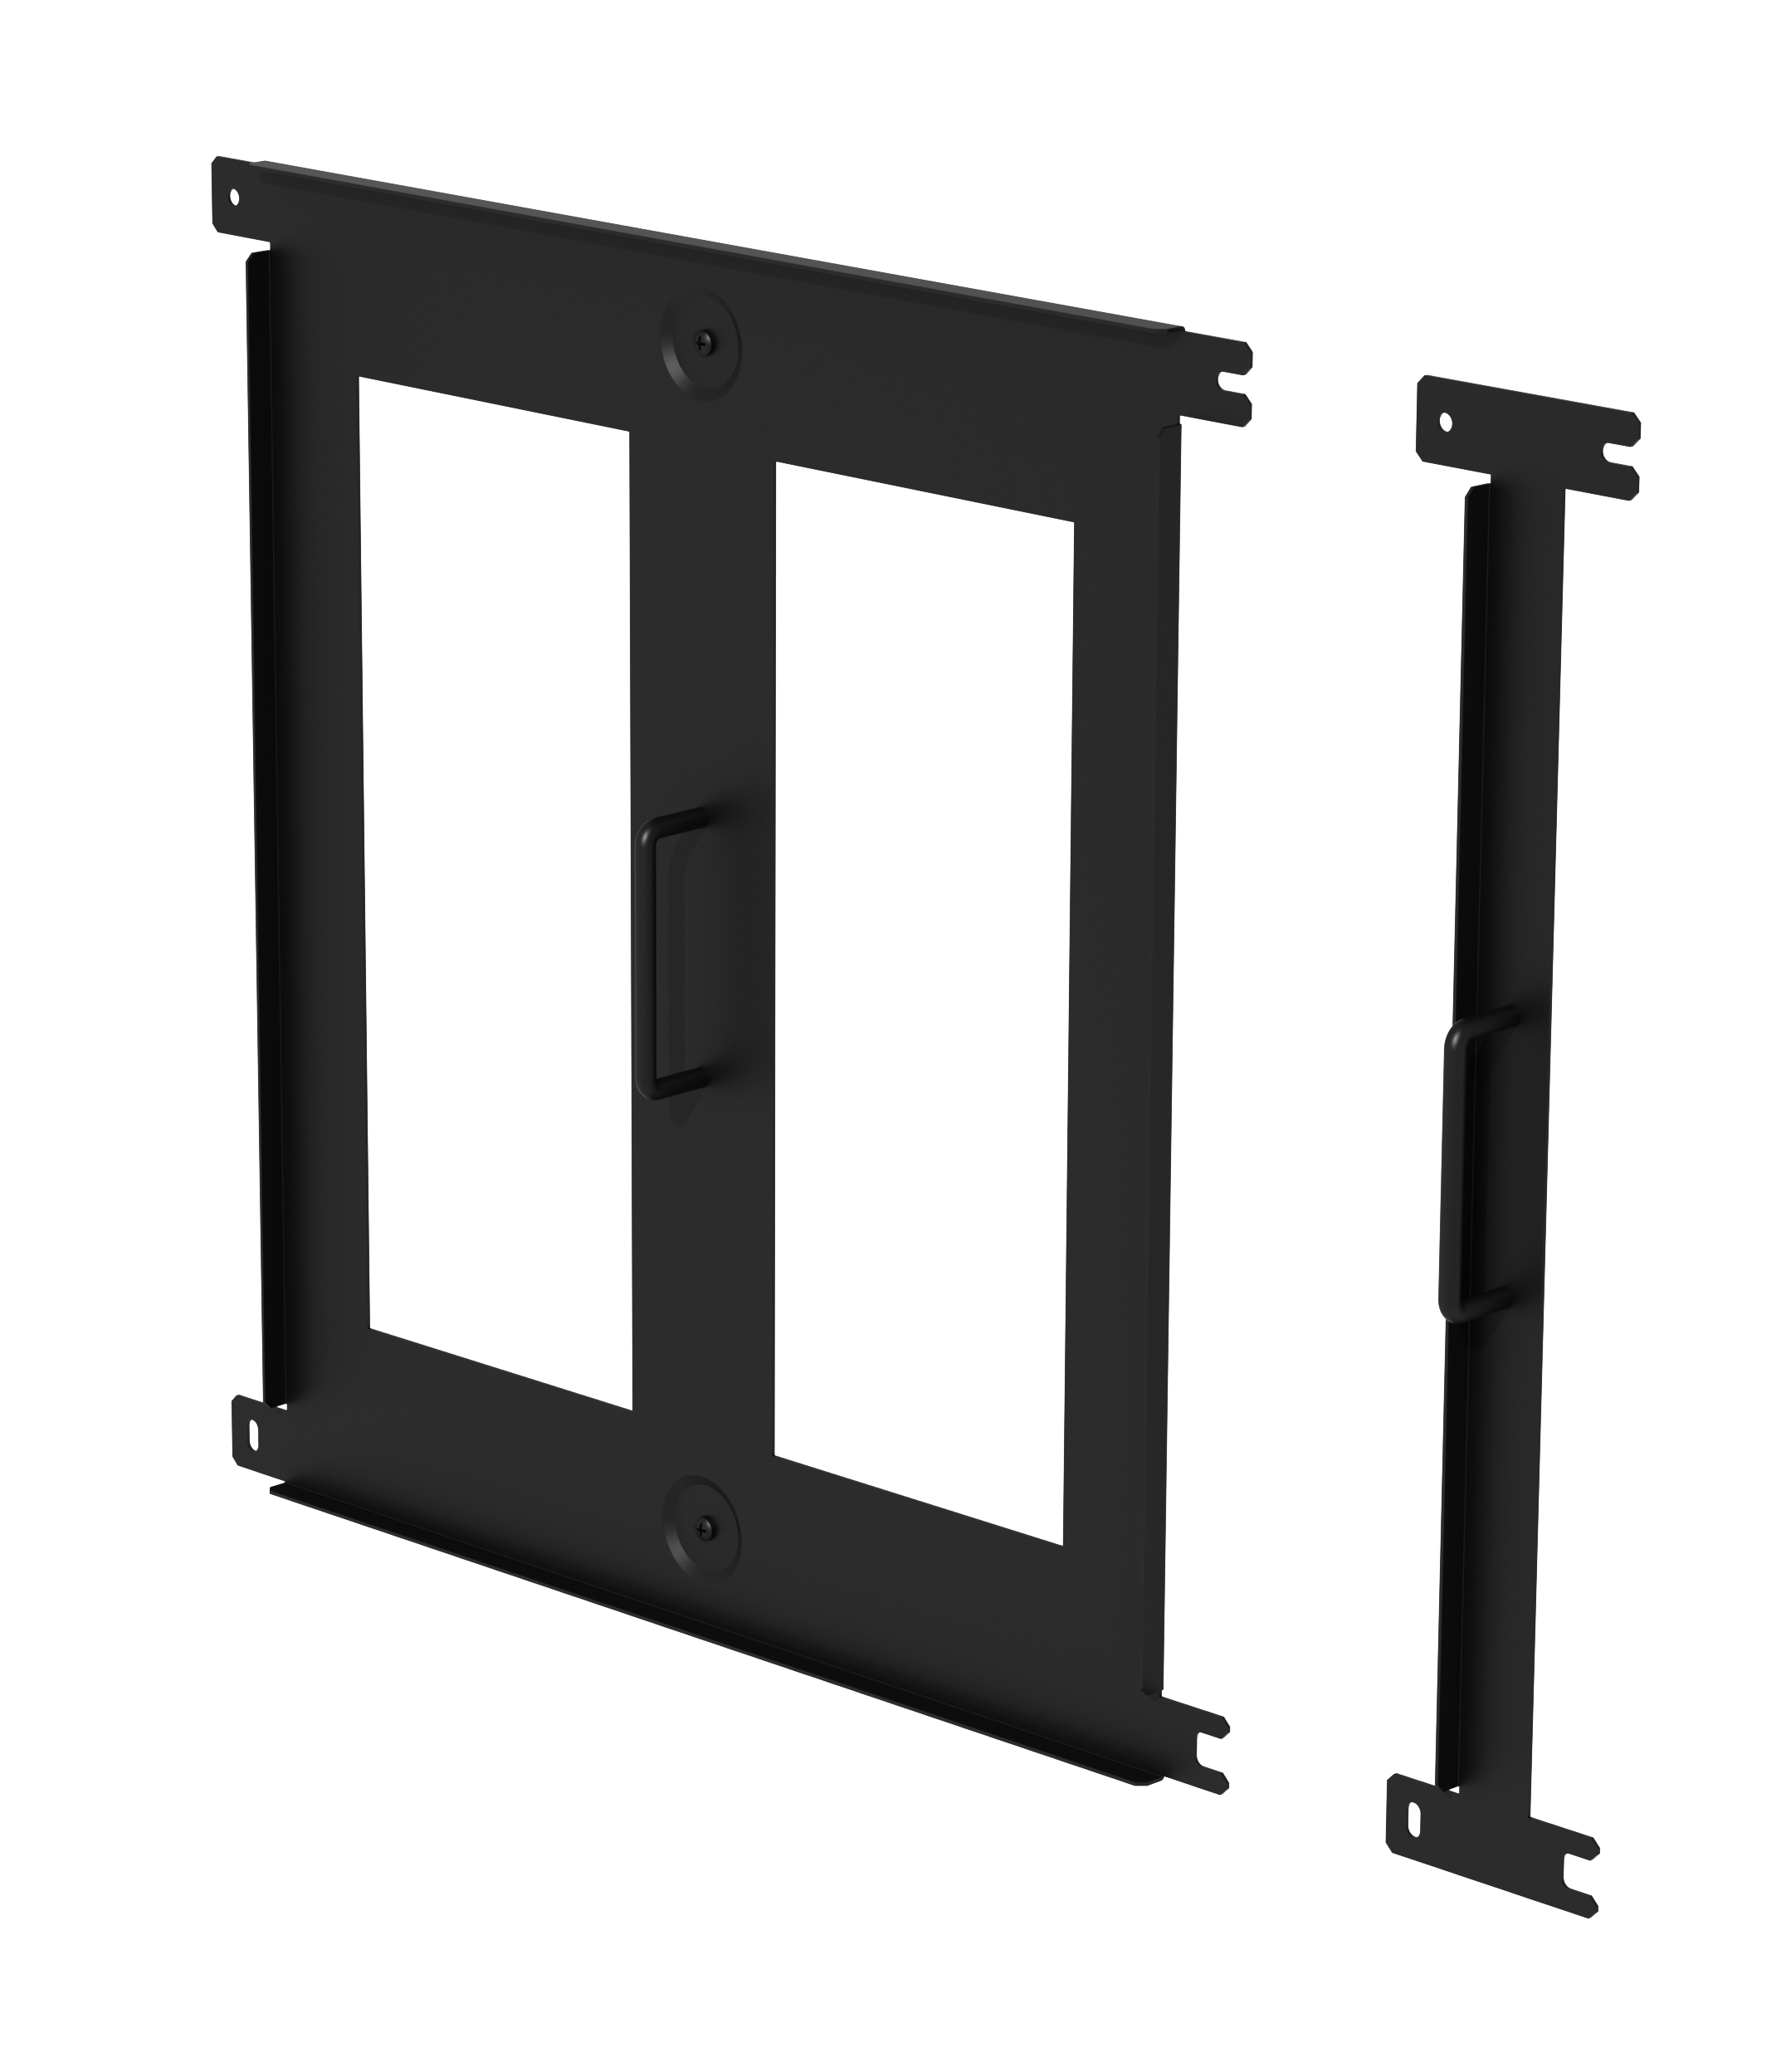 DS-VWRS045 Reusable Video Wall Spacer